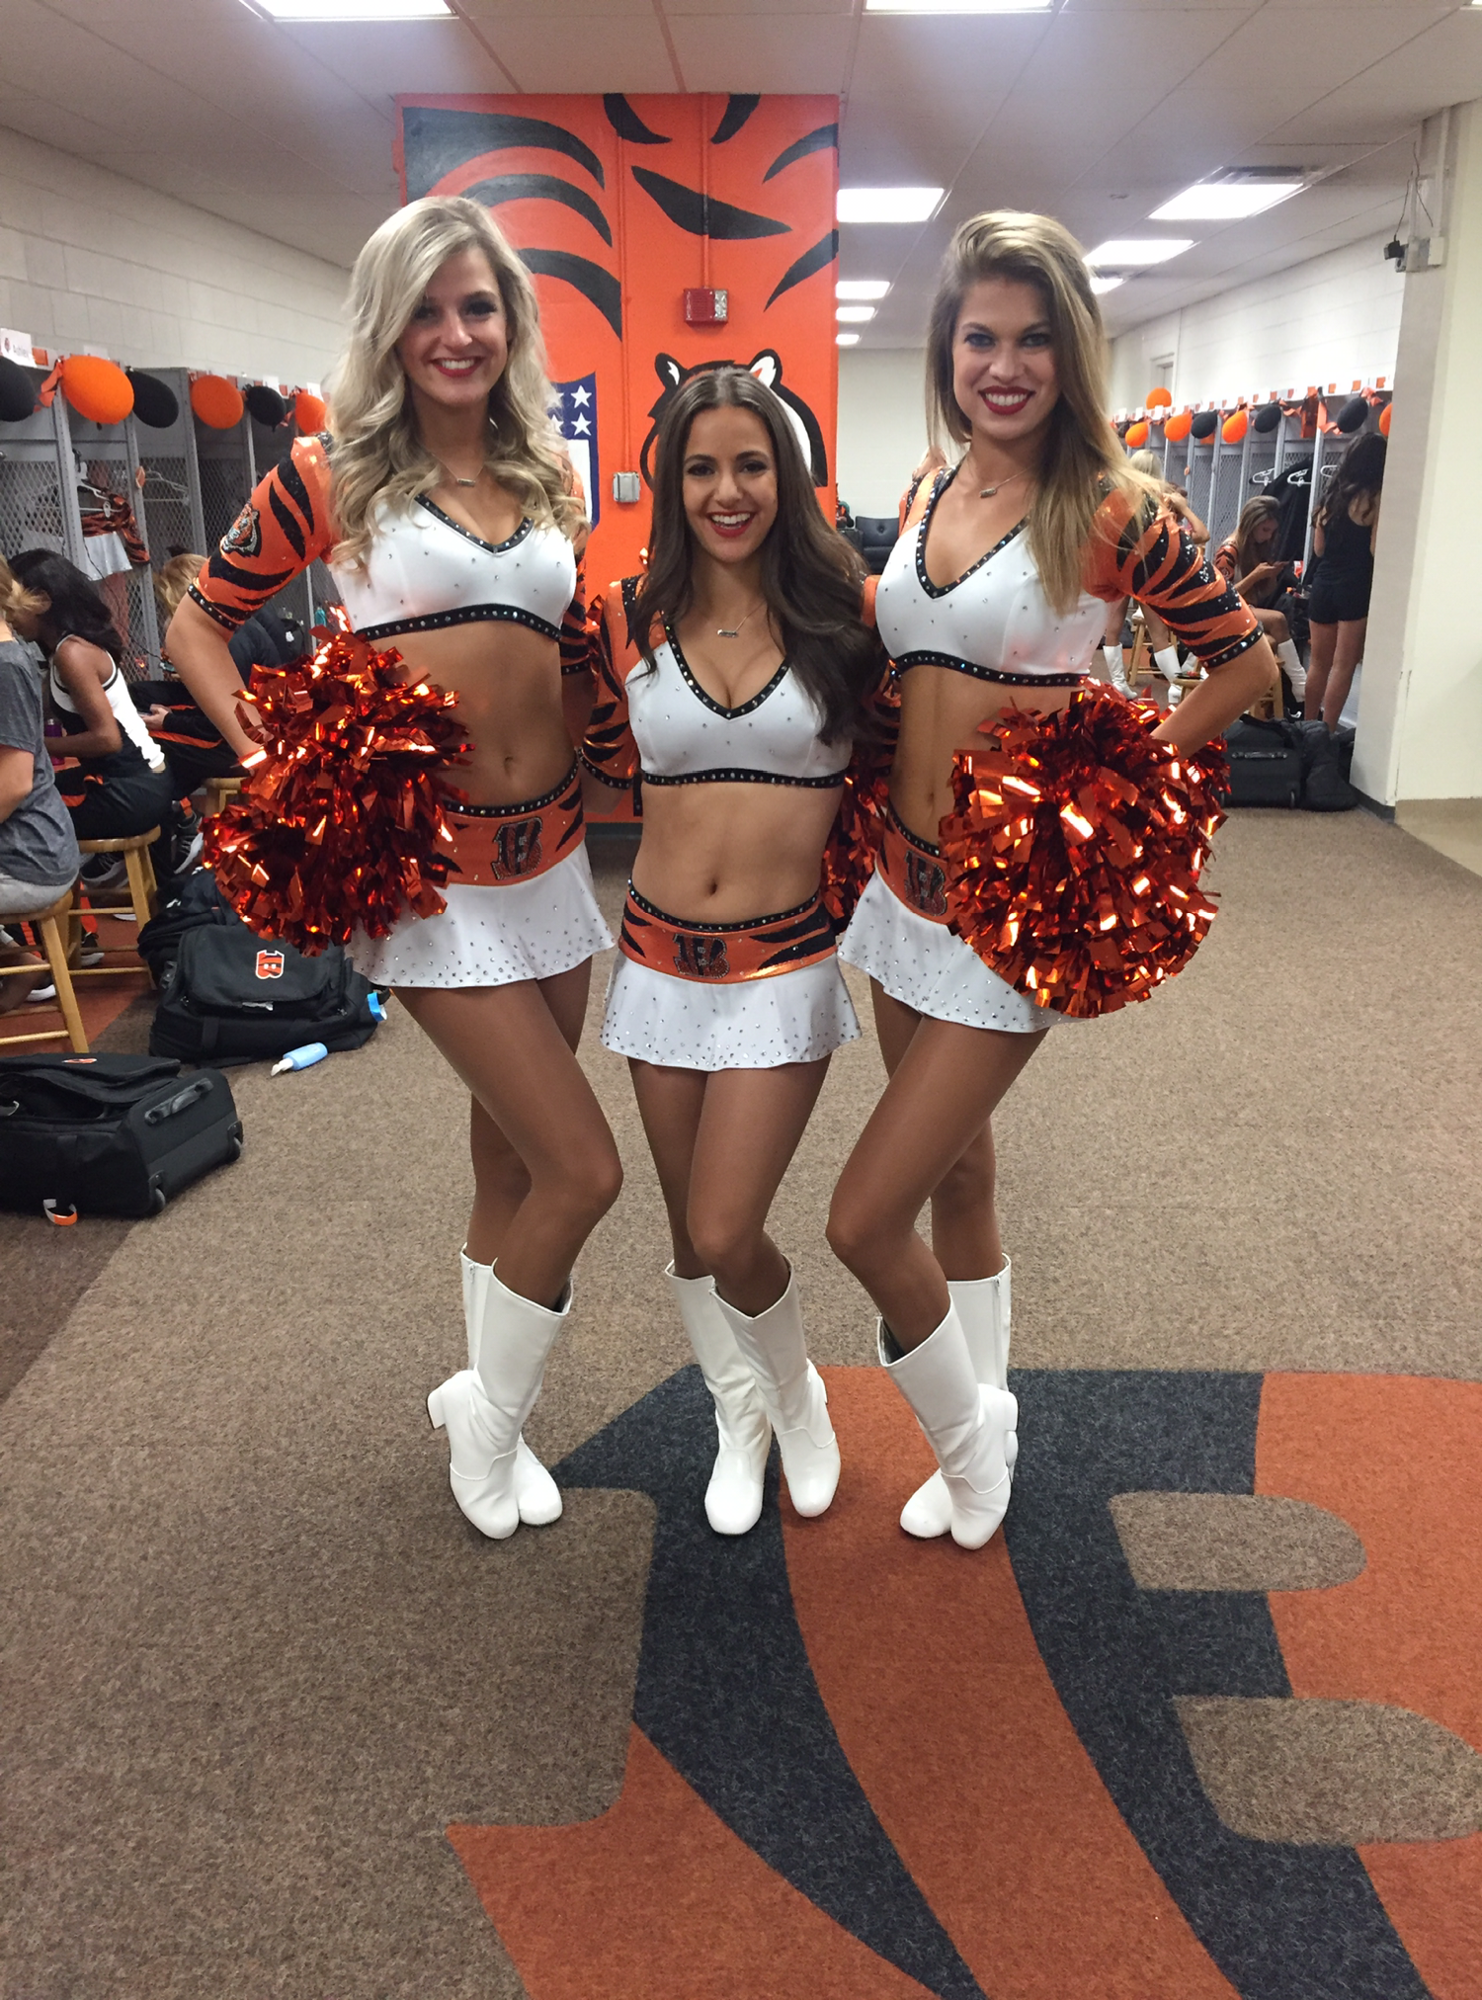 Jaclyn DeAugustino (middle) in the locker room with fellow Bengals cheerleaders. Photo courtesy of Jaclyn DeAugustino